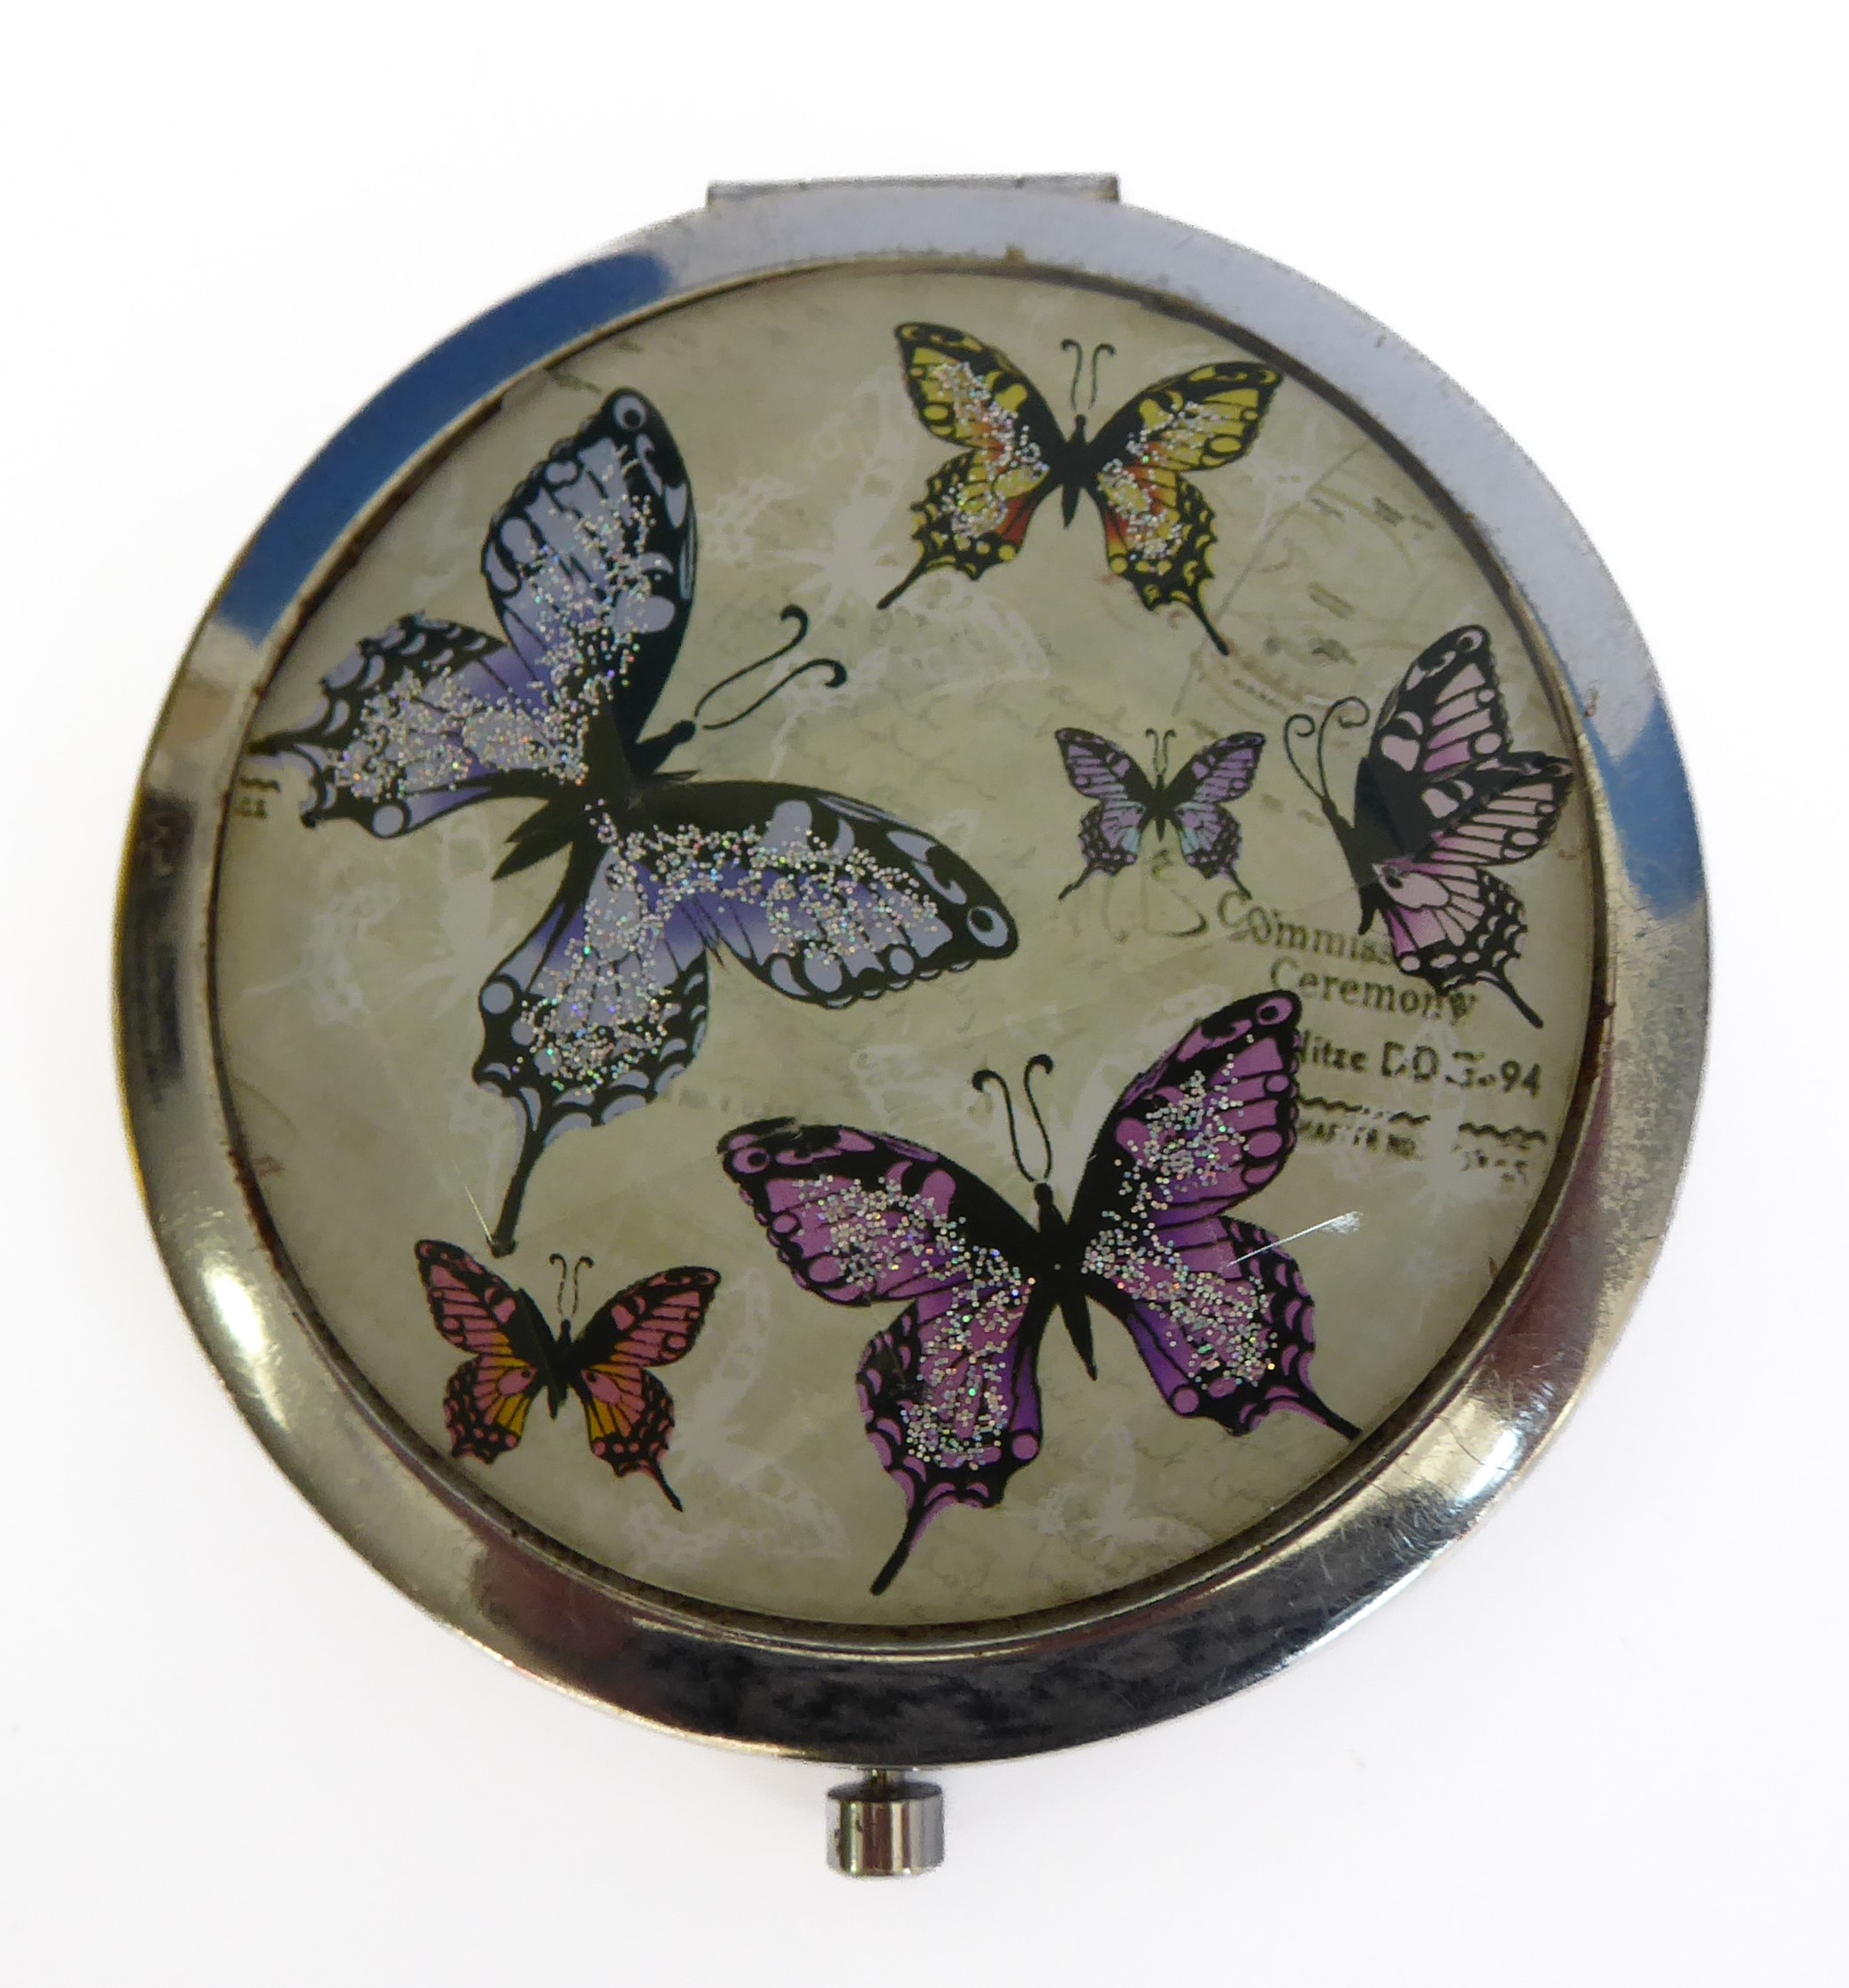 A mid-20th century circular powder compact, faceted glass lid decorated with glitter butterflies (